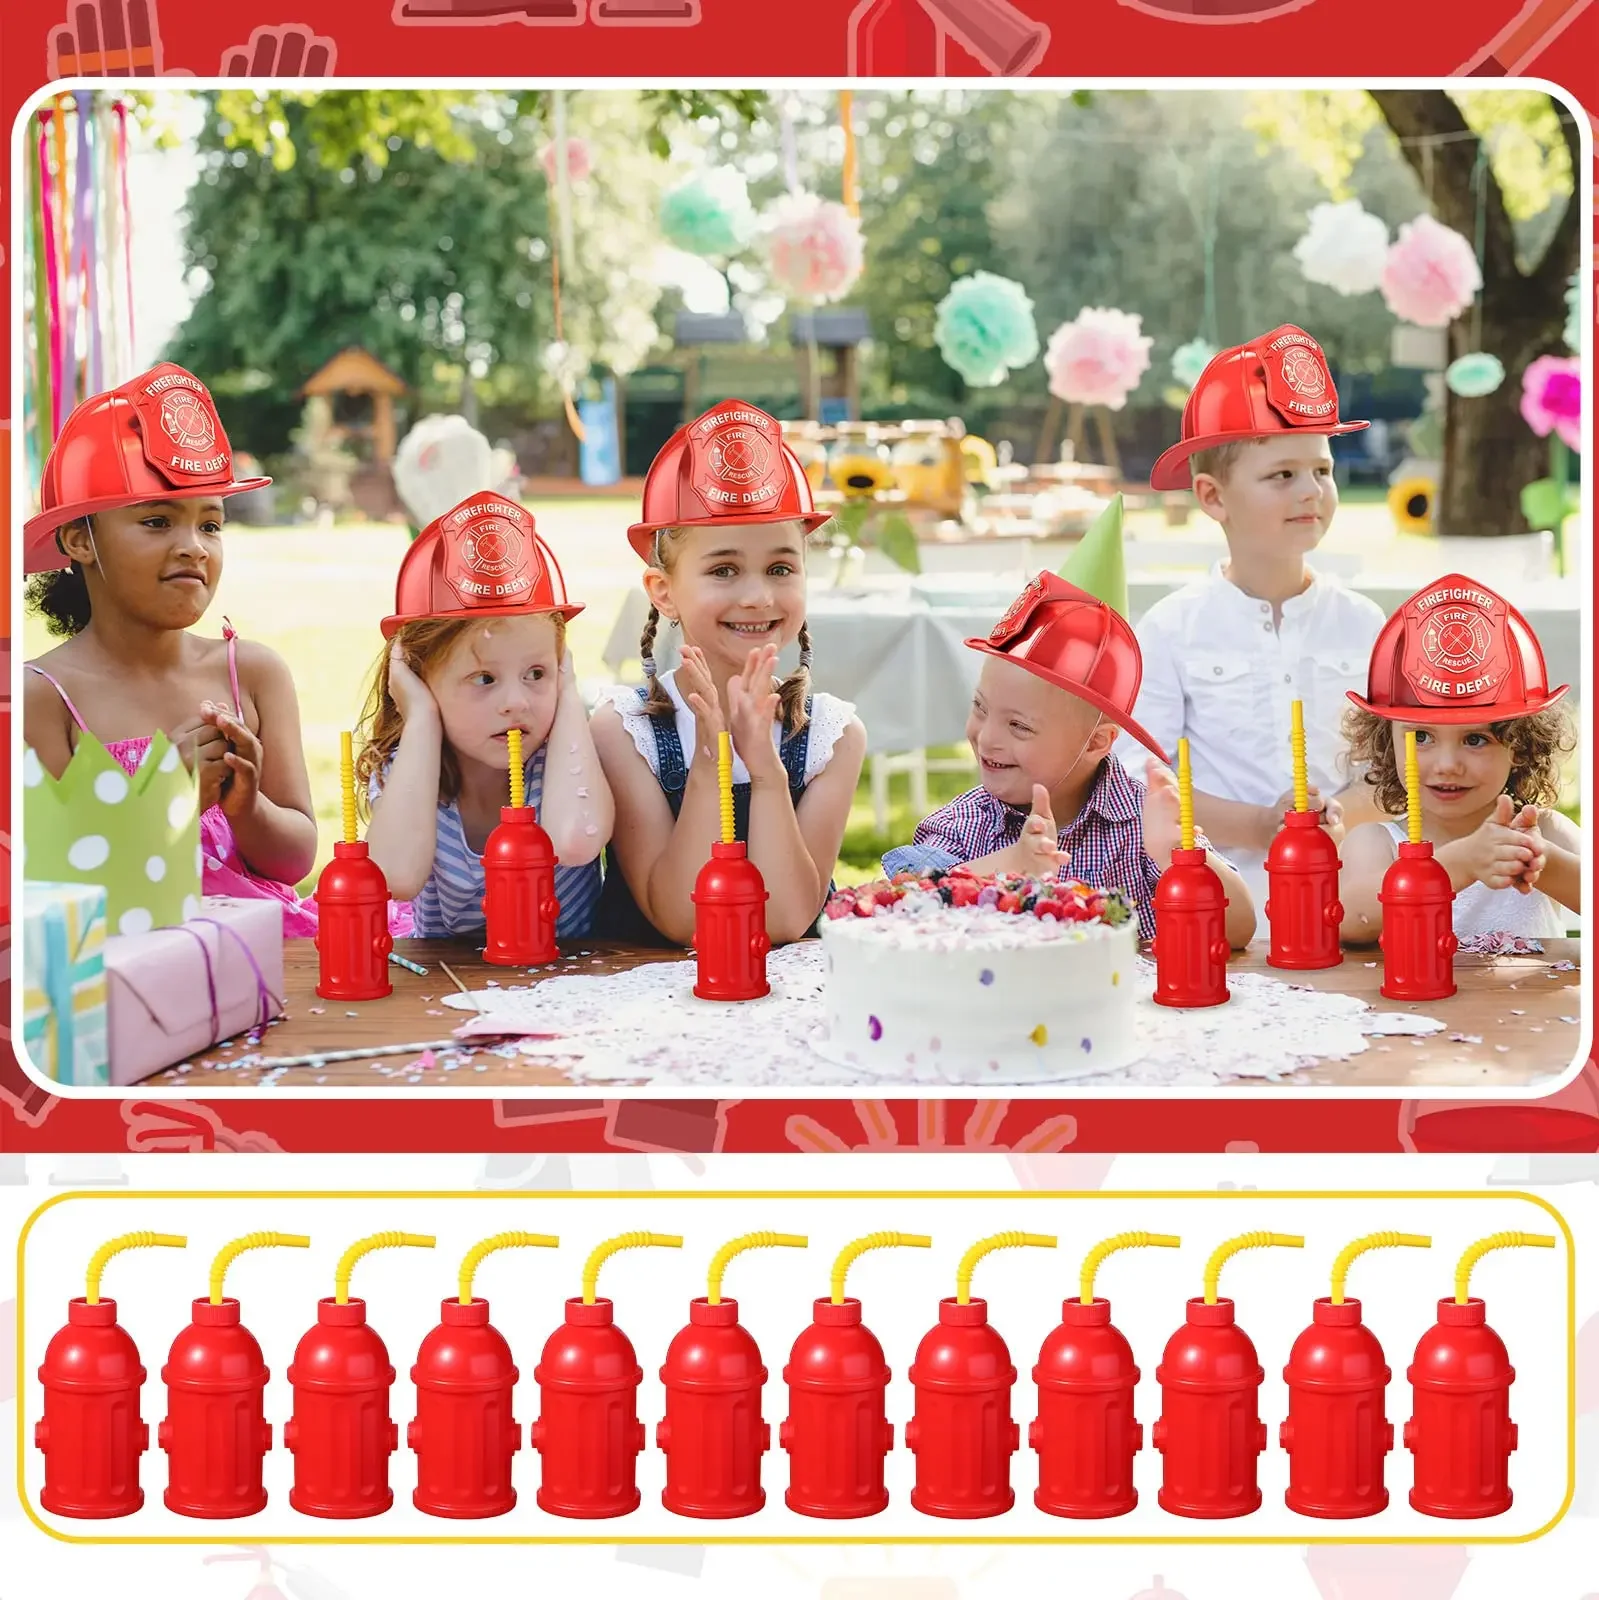 

2/4/6/8/10pcs Novelty Fire Hydrant Straw Cups with Lid Fireman Firefighter Birthday Party Favors Boys 8oz Red Plastic Water Cups